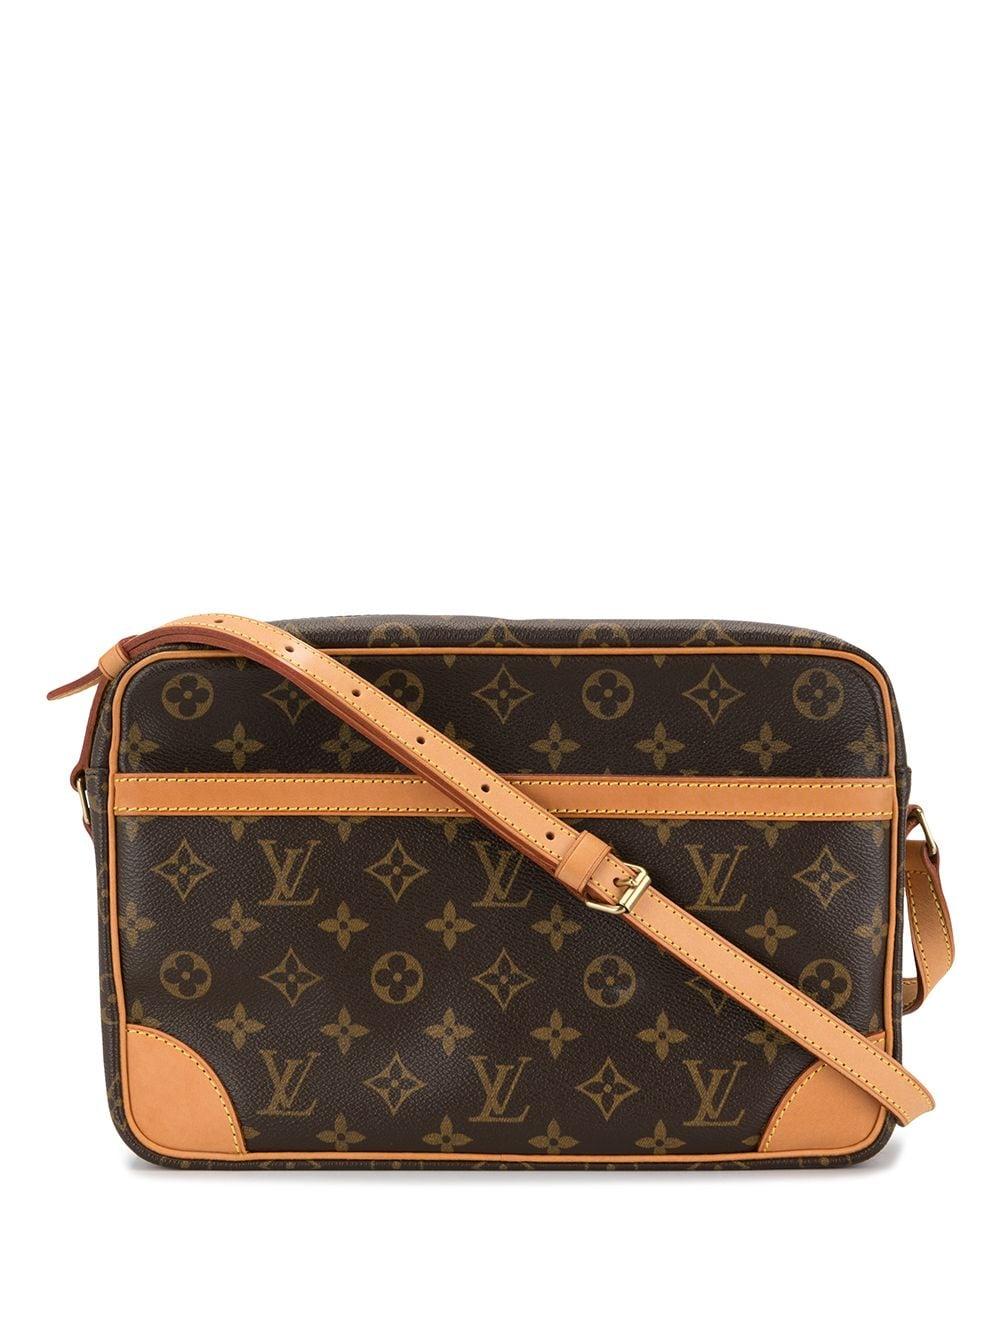 Louis Vuitton Leather Trocadero 30 Crossbody Bag in Brown - Lyst